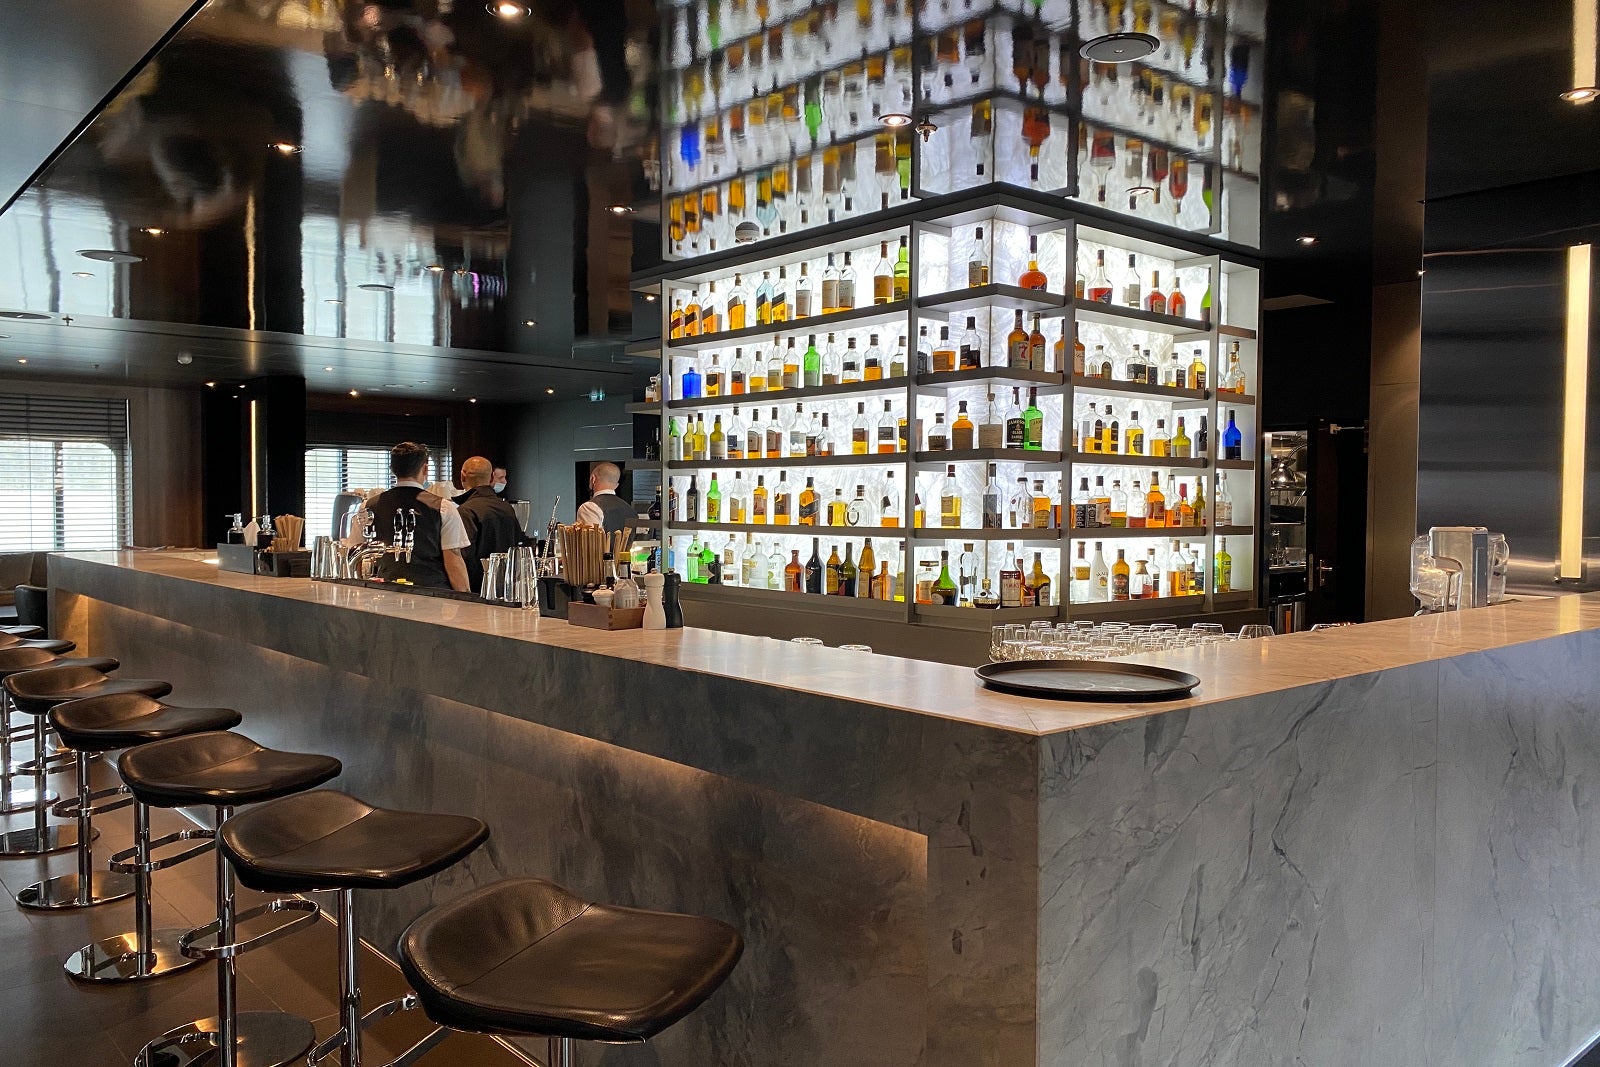 A large granite bar with chairs faces a floor-to-ceilling wall of shelves filled with whiskies from all over the world.